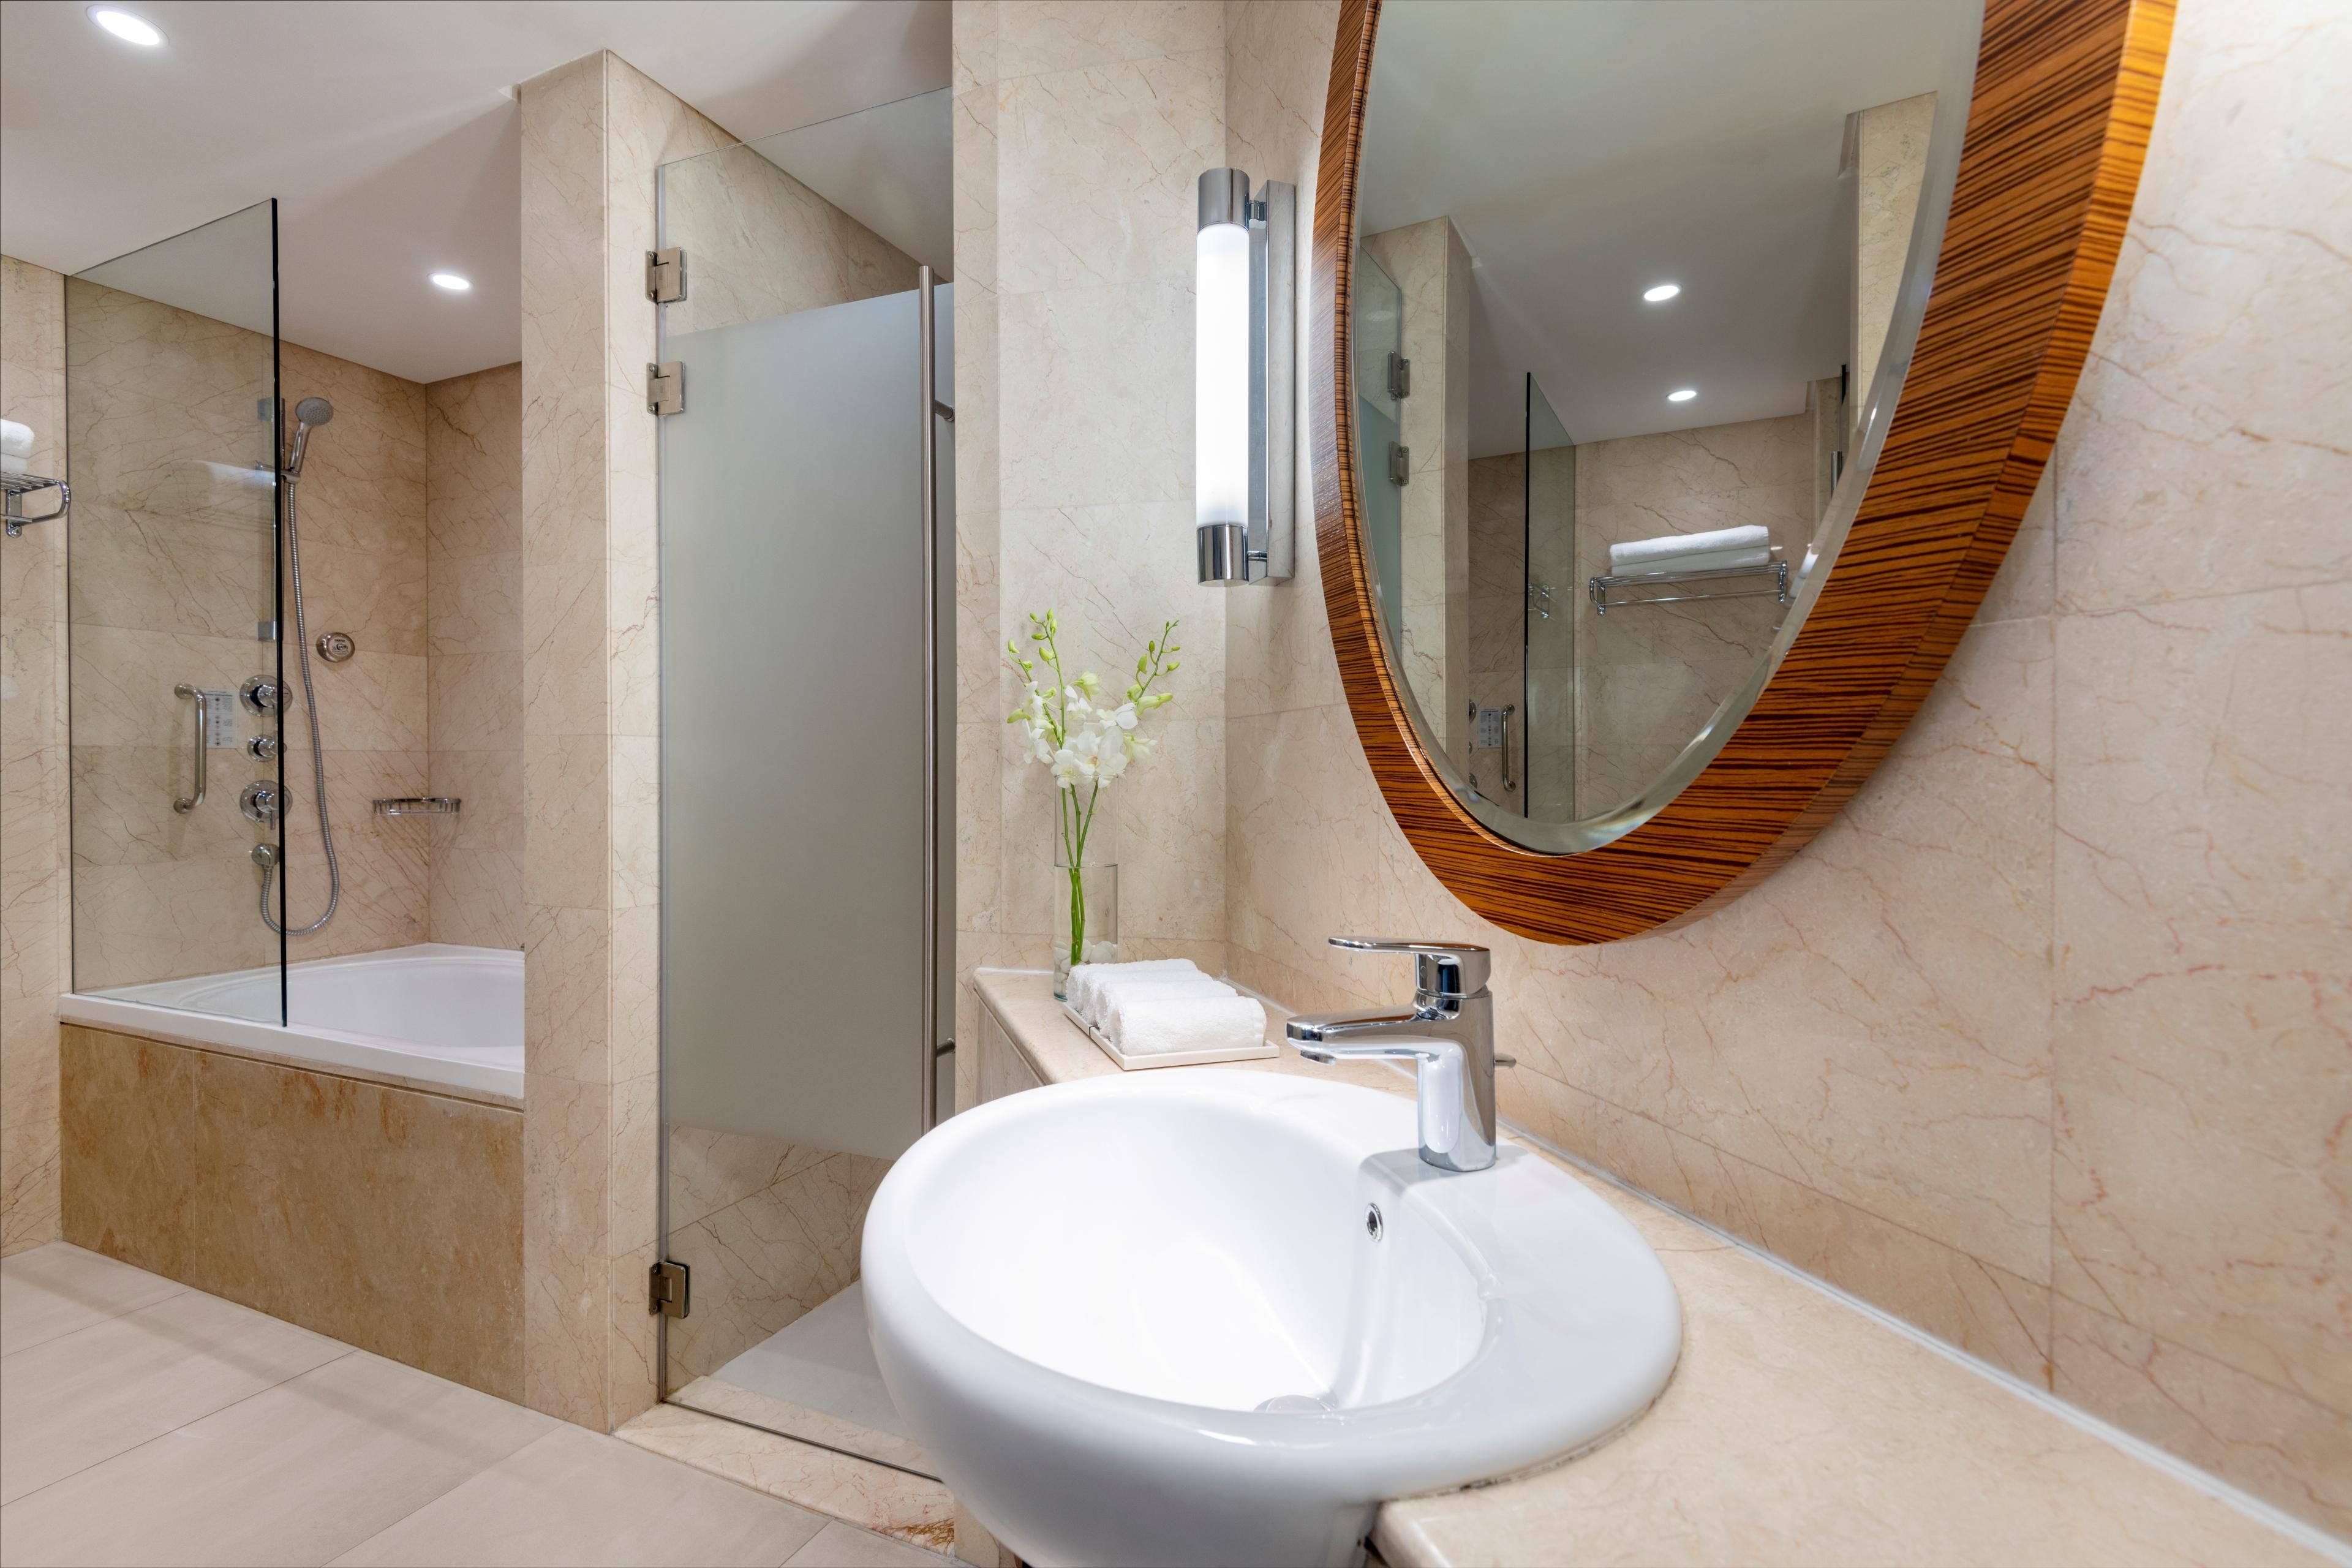 Presidential Suite bathroom features a shower room and a bathtub